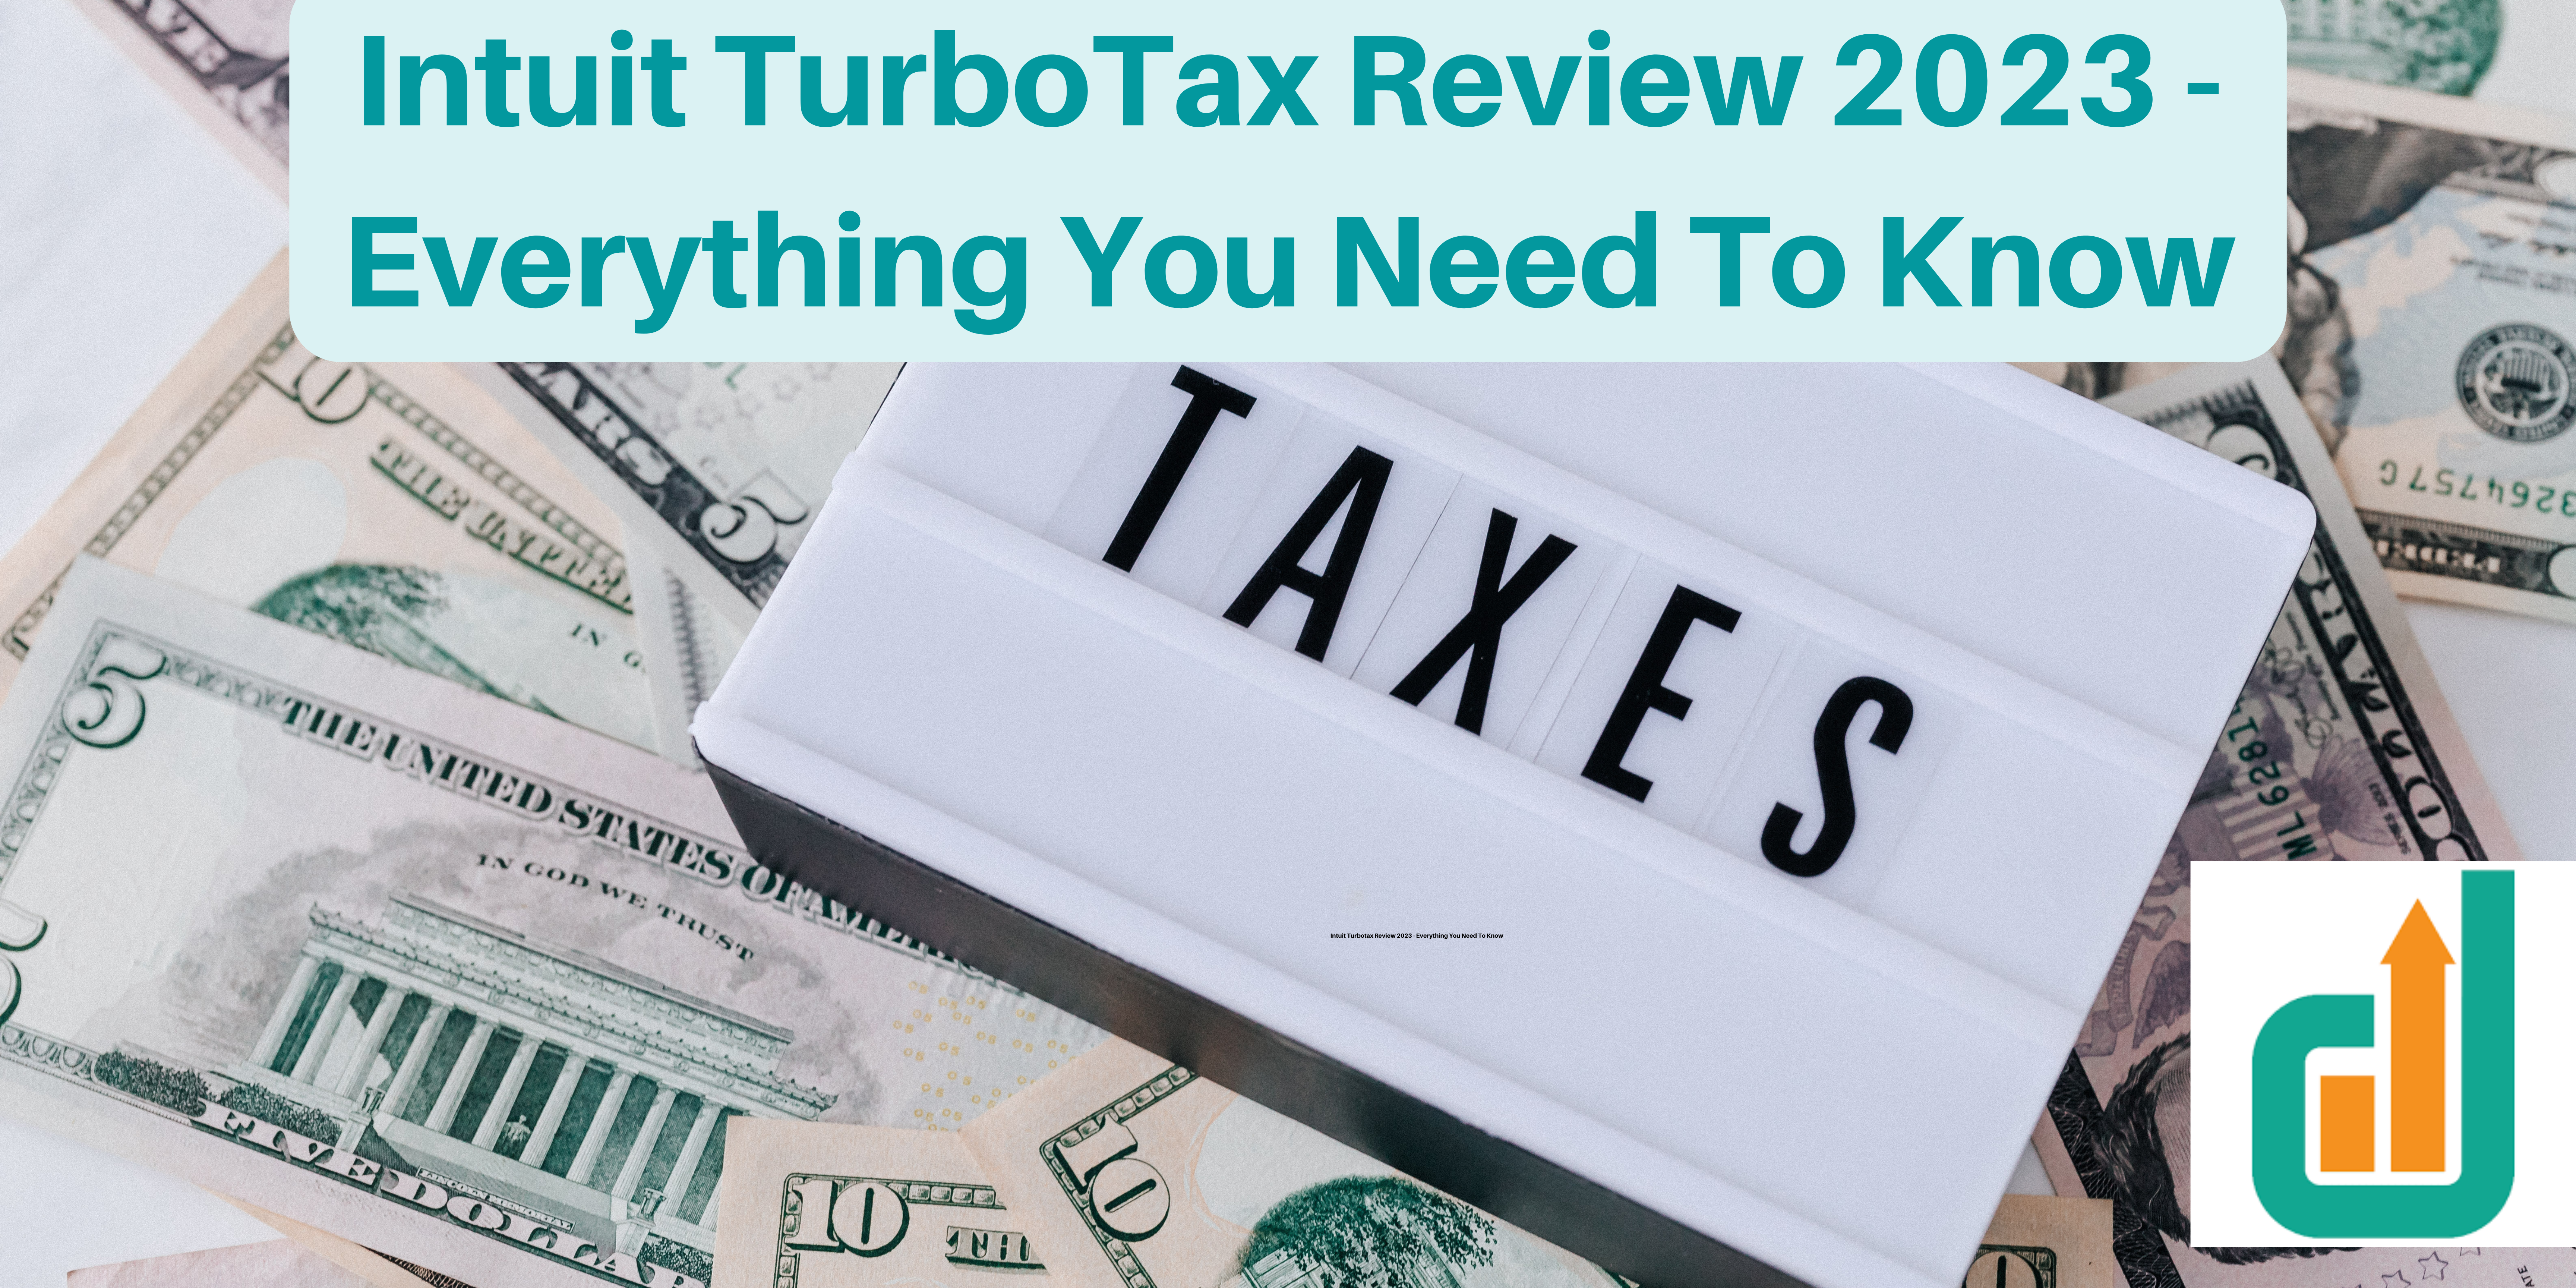 TURBOTAX REVIEW